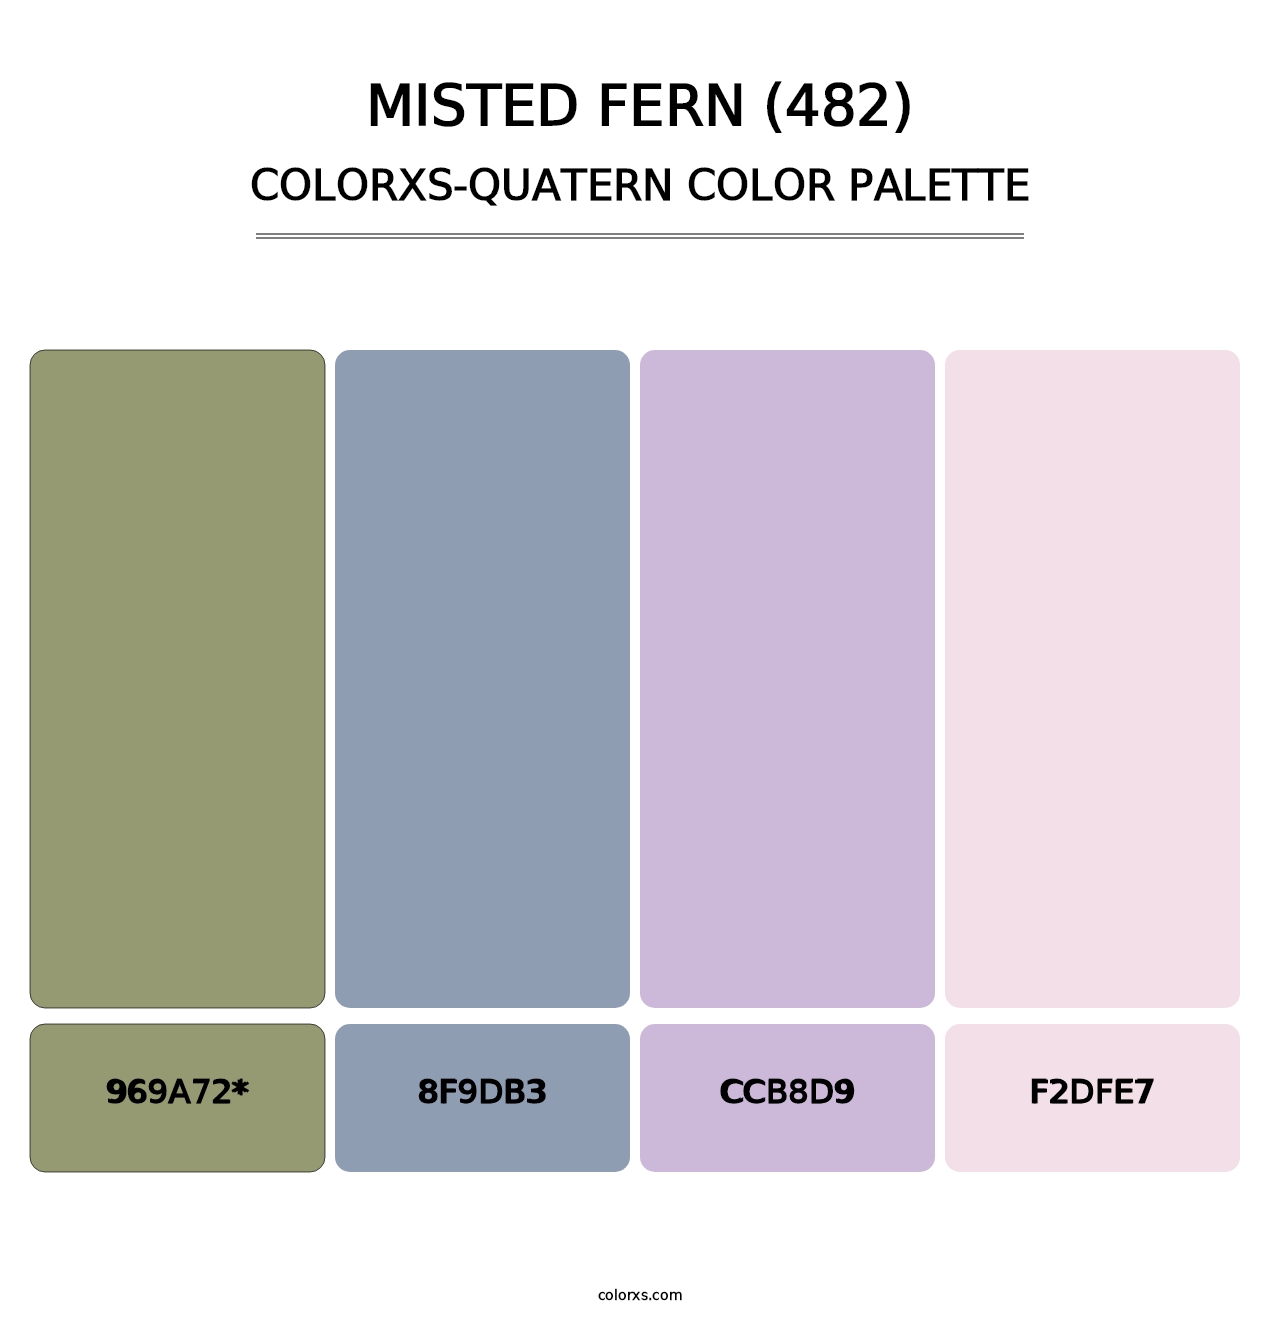 Misted Fern (482) - Colorxs Quatern Palette